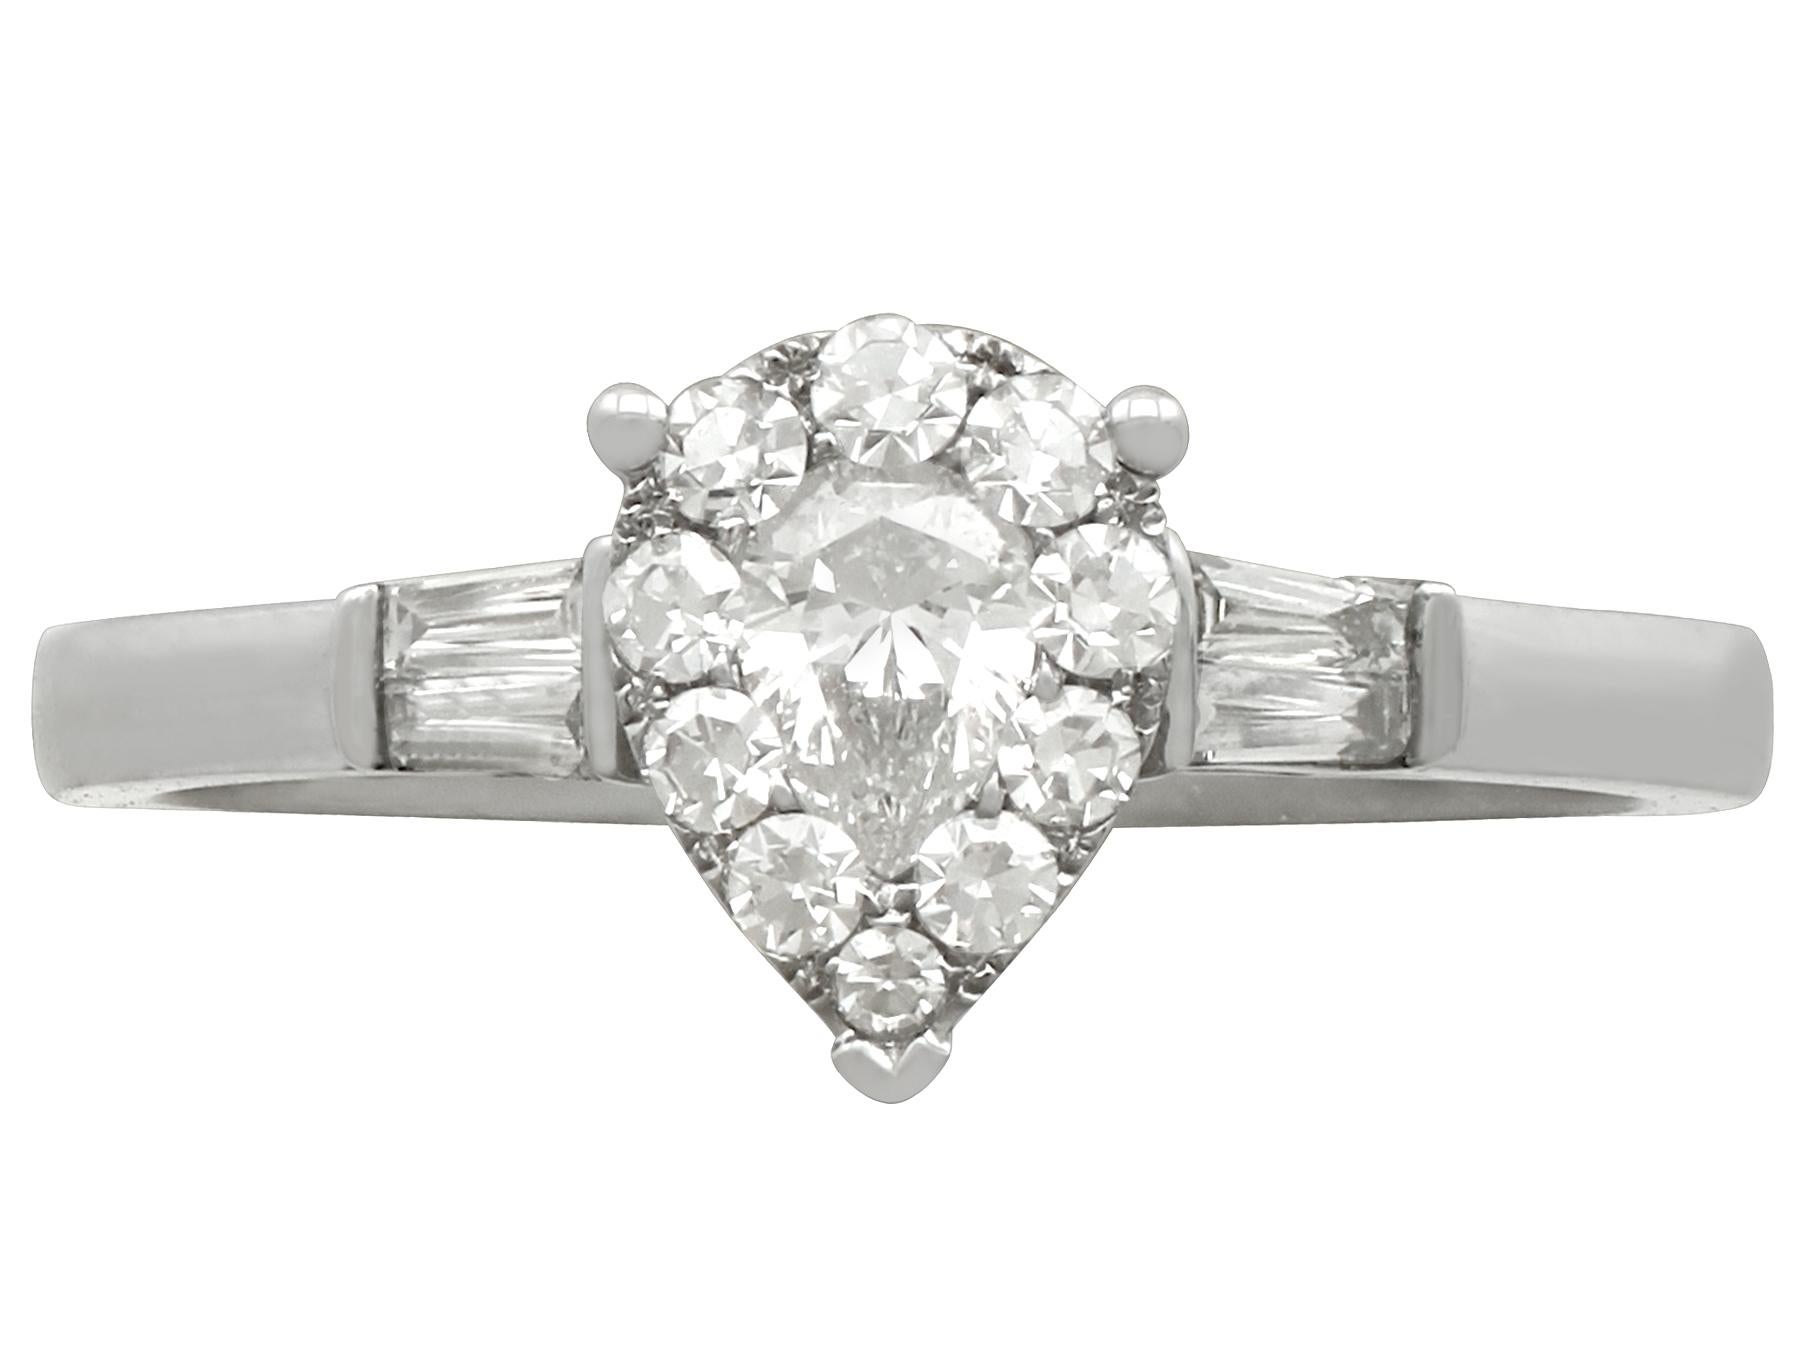 A fine and impressive pear cut 0.50 carat diamond and 18 karat white gold dress ring; part of our diverse diamond jewelry collection

This fine and impressive contemporary pear cut solitaire ring has been handcrafted in 18k white gold.

The ring